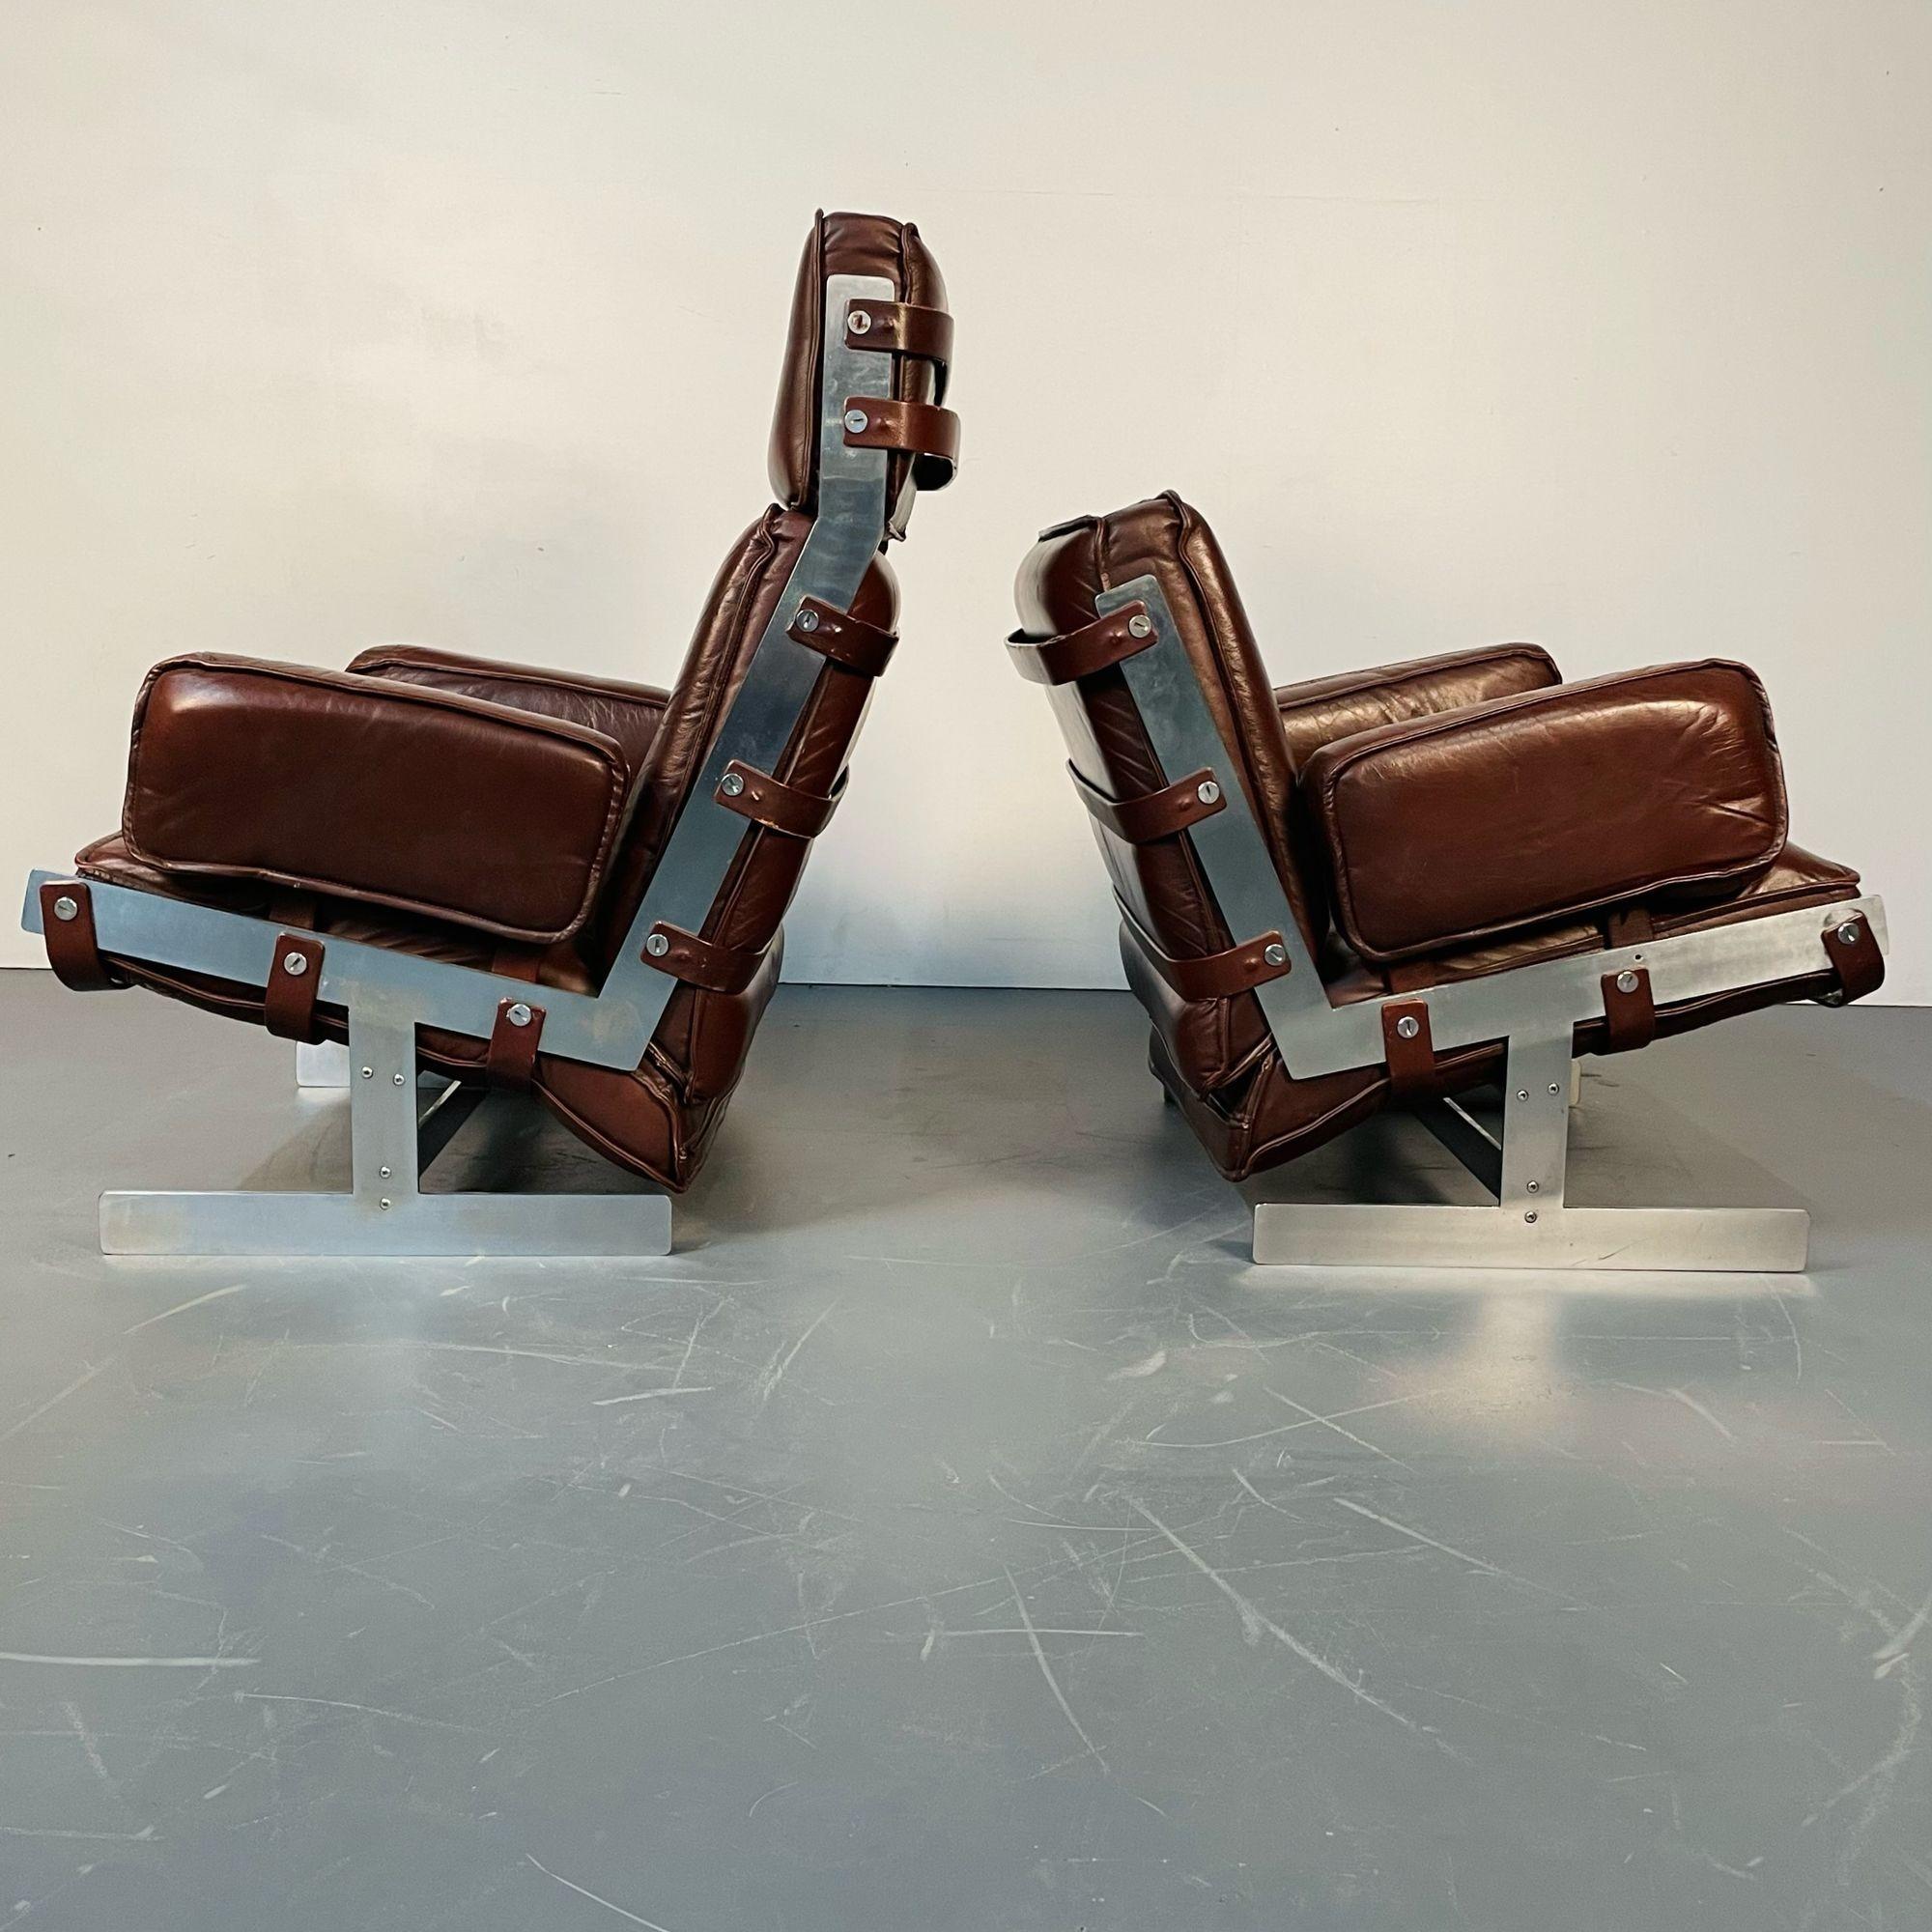 Arne Norell, Swedish Mid-Century Modern Lounge Chairs, Leather, Steel, 1960s For Sale 9